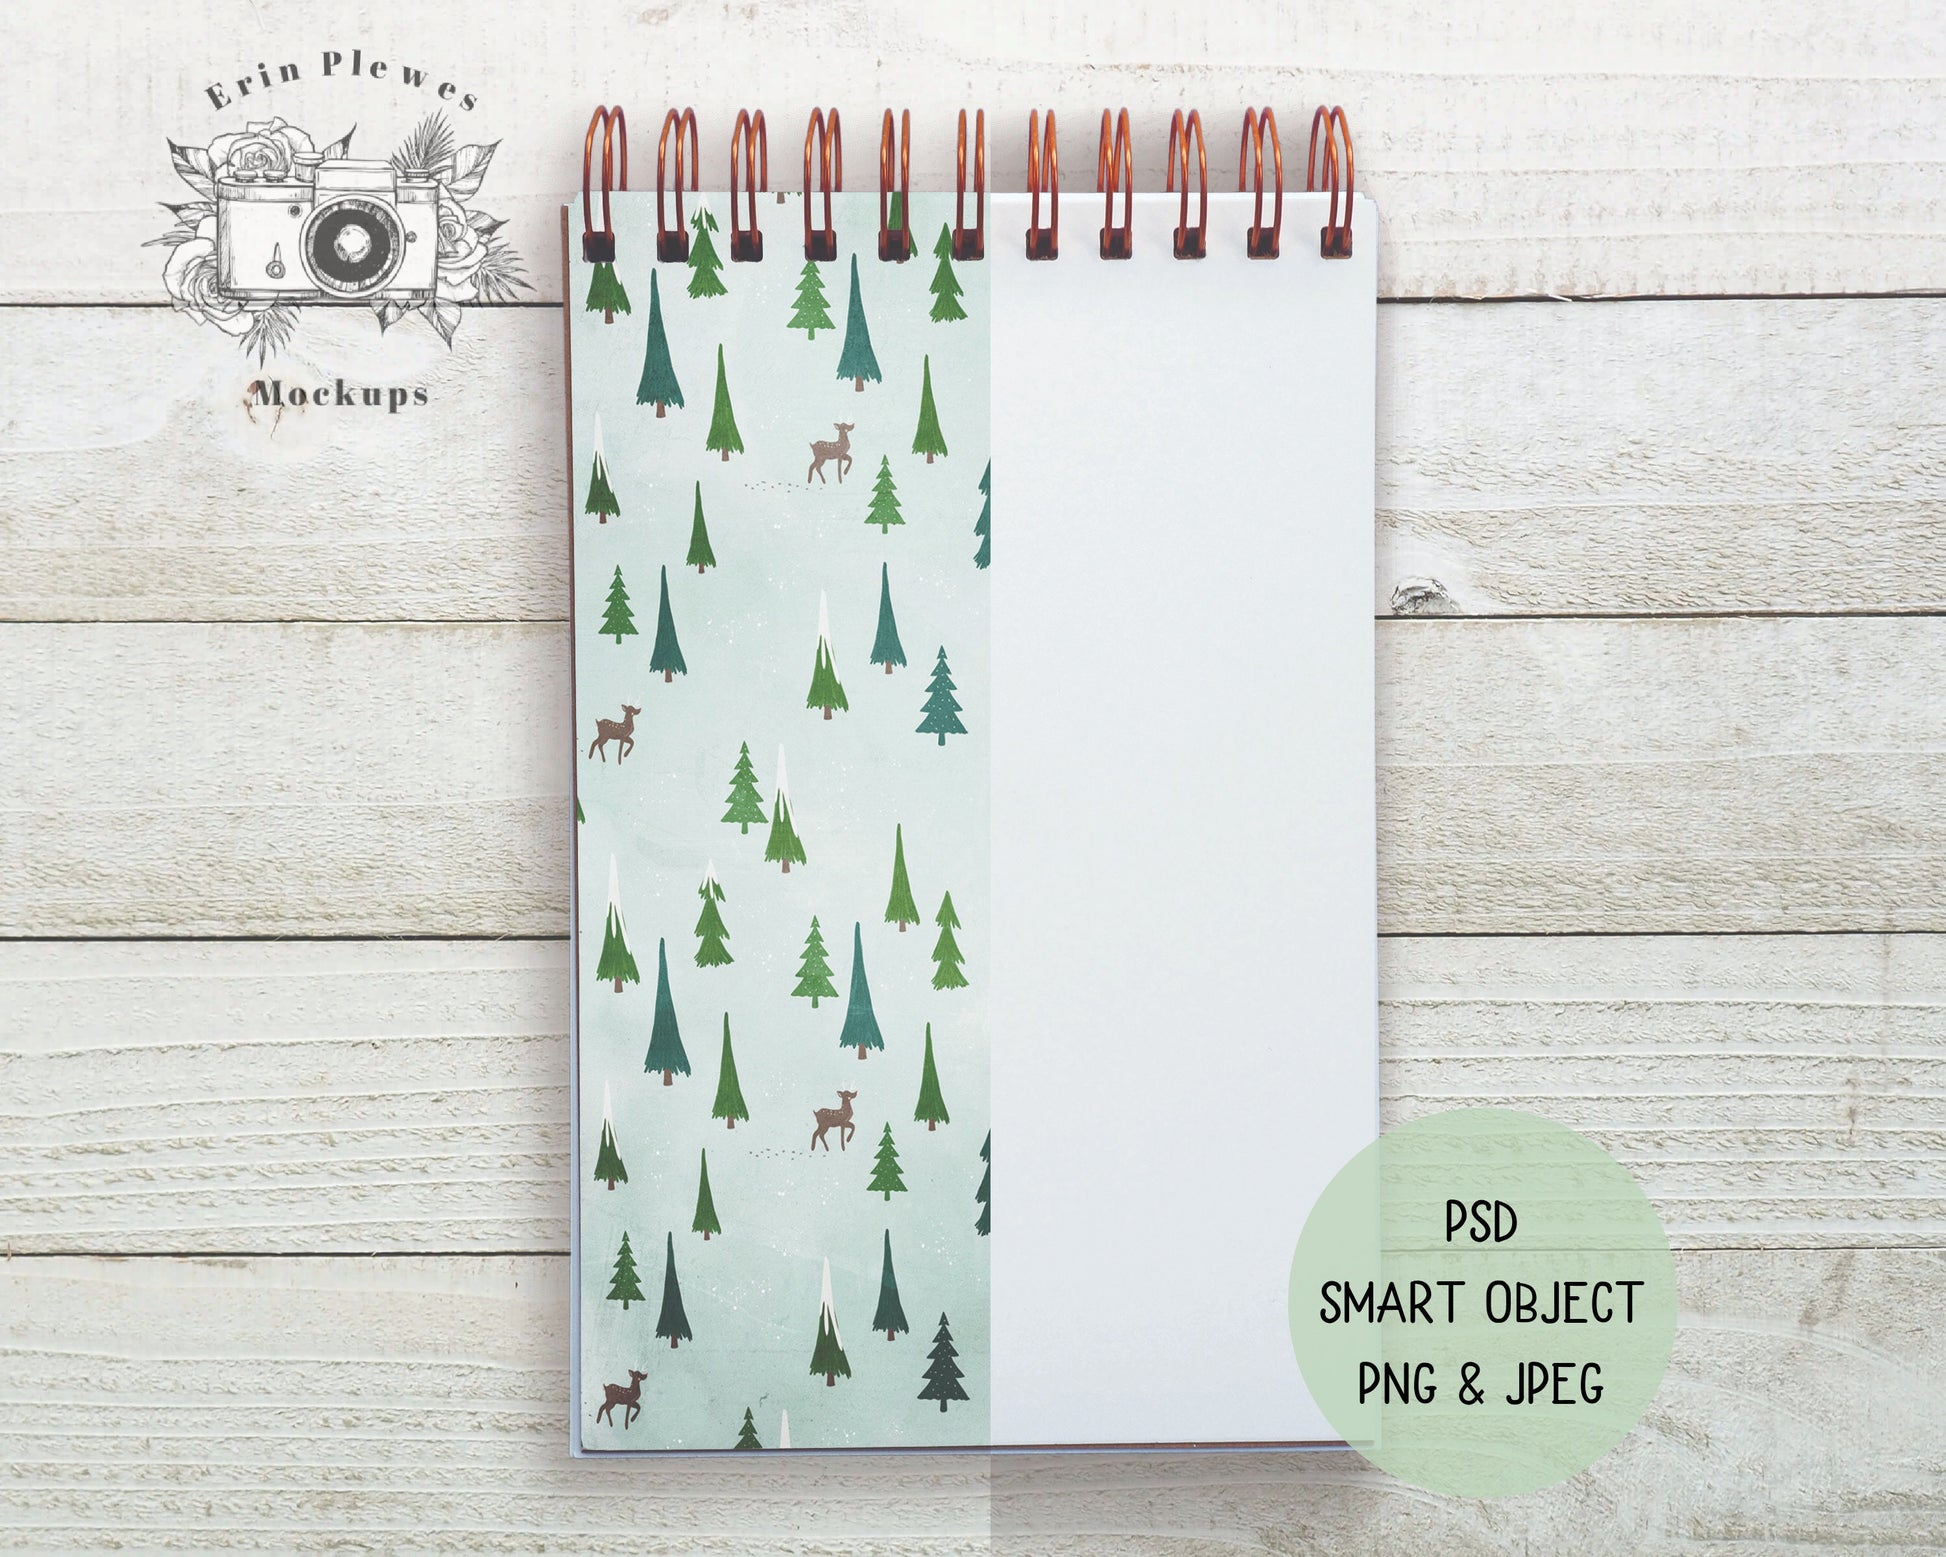 Spiral Notebook Mockup, Notebook Mock Up on Rustic Shiplap, PSD Smart Object Stationary Flat Lay, Instant Digital Download Jpeg PNG